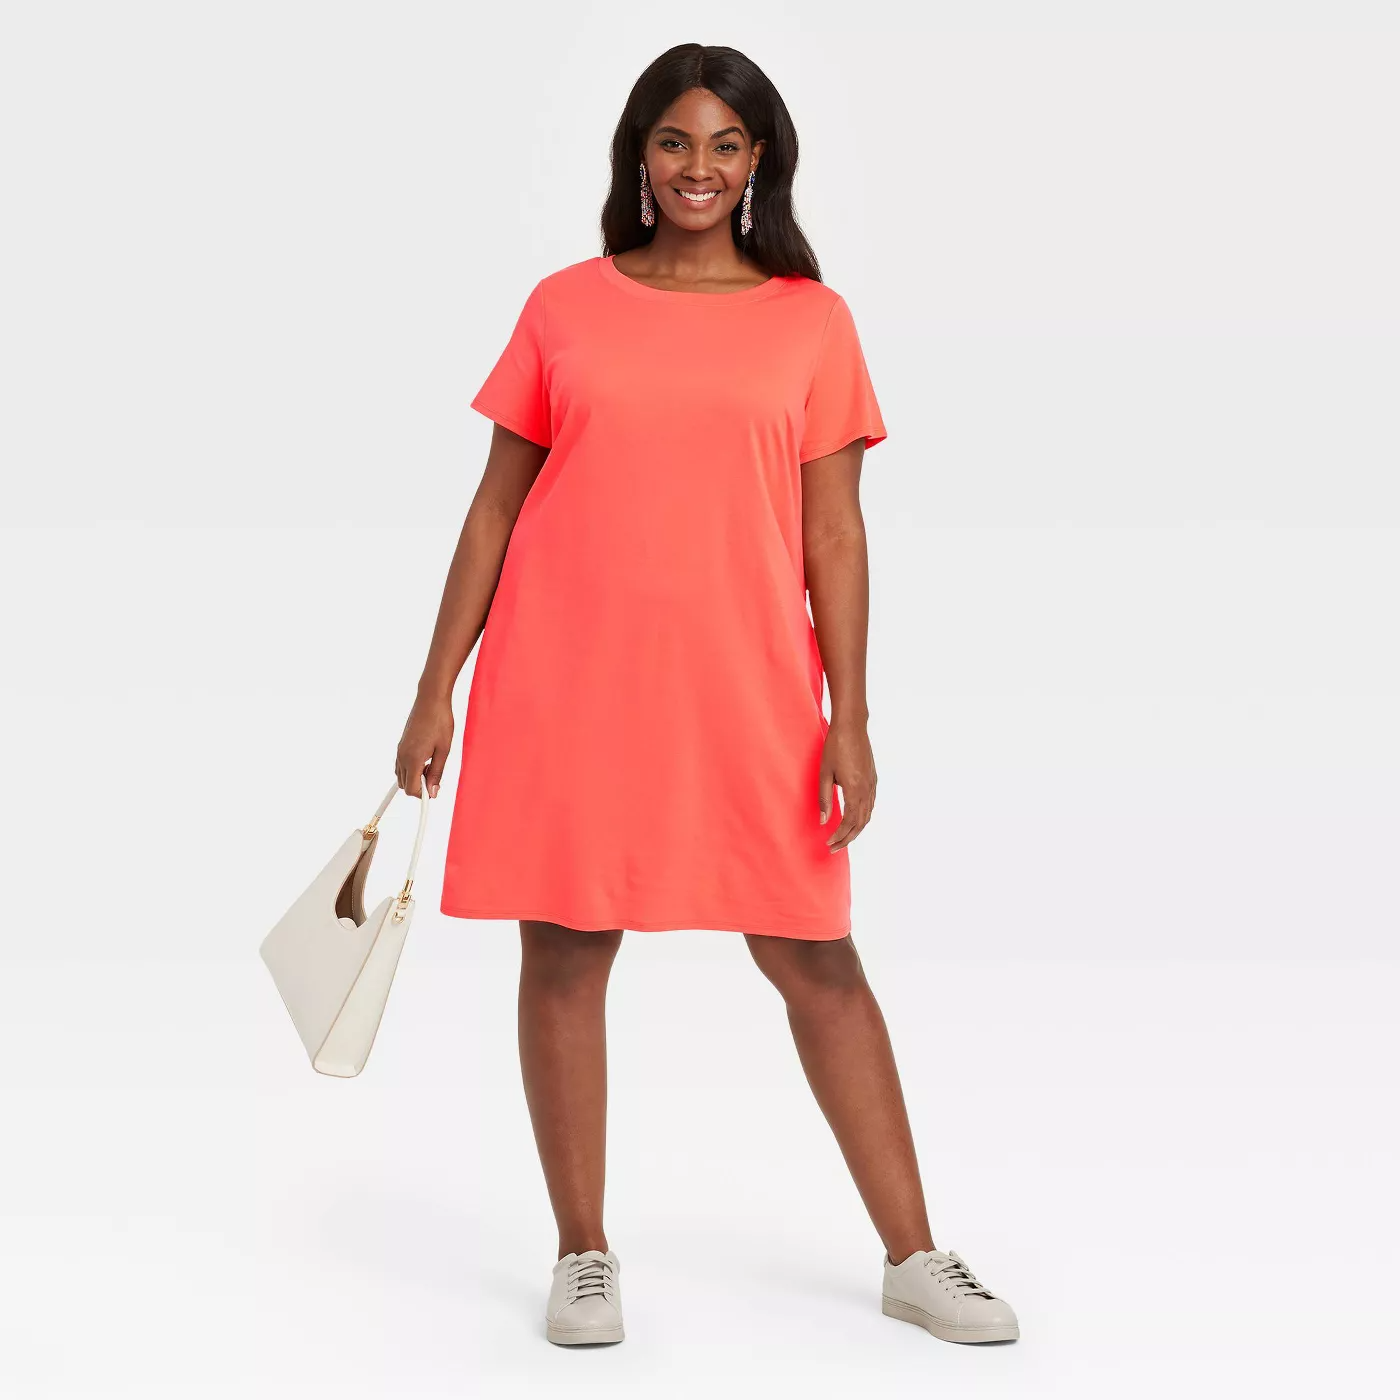 A Plus Size Guide to Shirtdresses